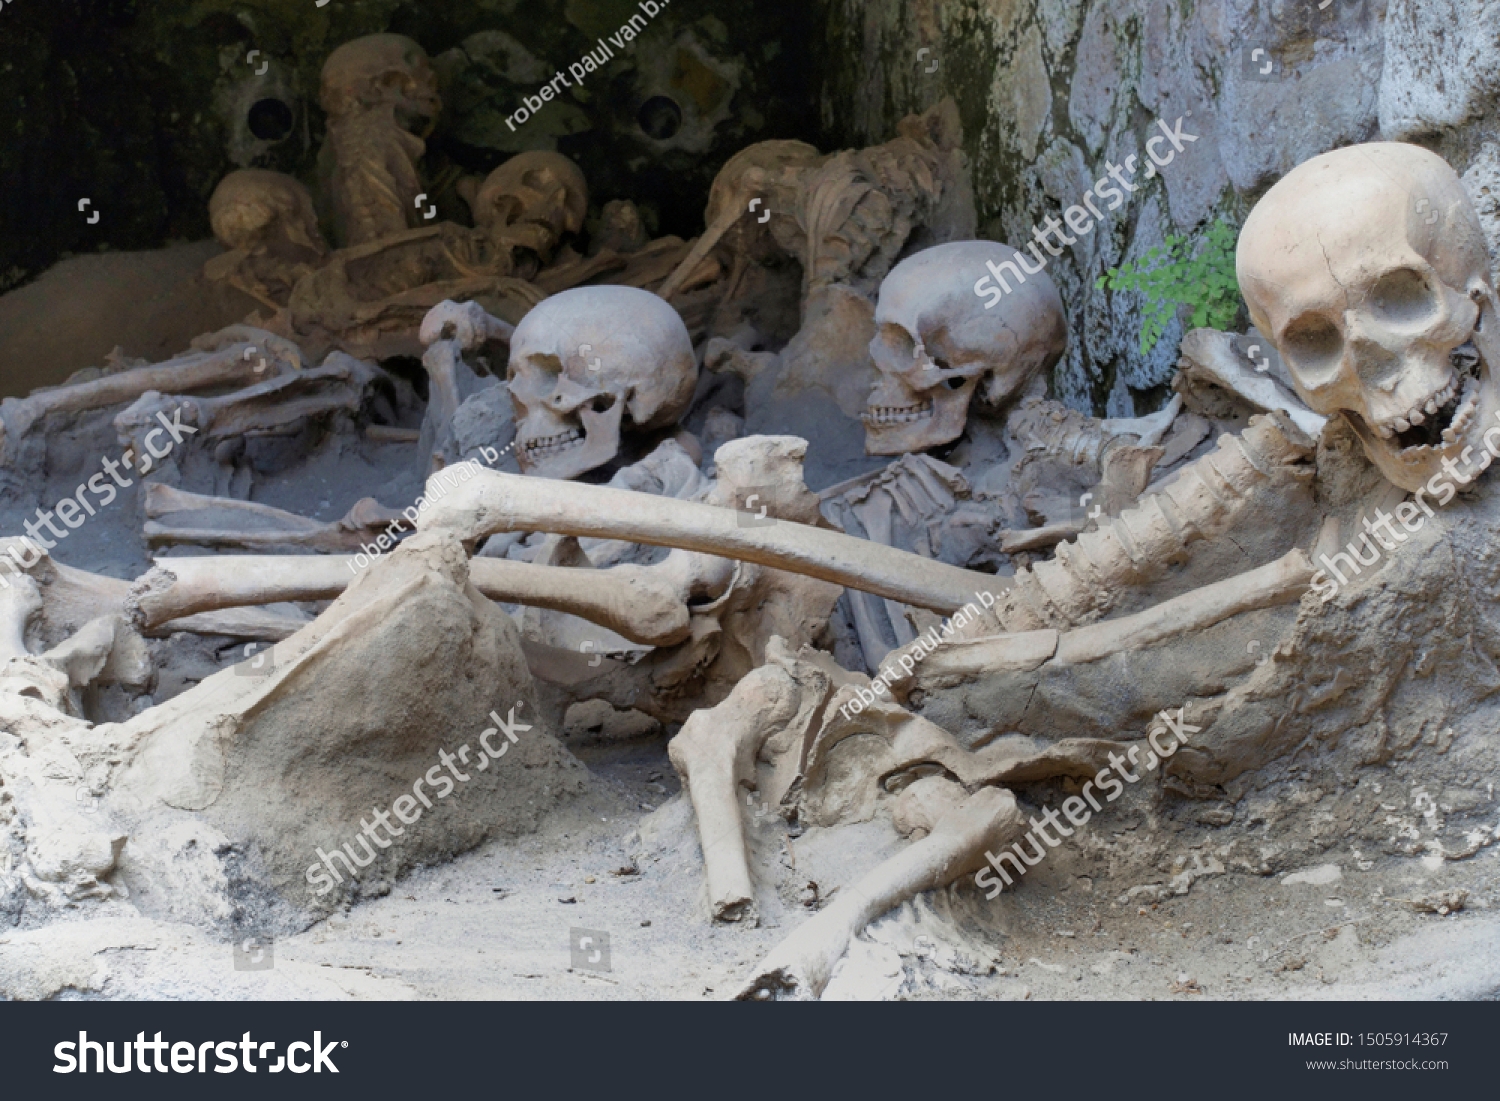 Replica skeletons in the position that the bodies were found after volcanic flow in 79AD Herculaneum Ercolana Campania Italy                                 #1505914367